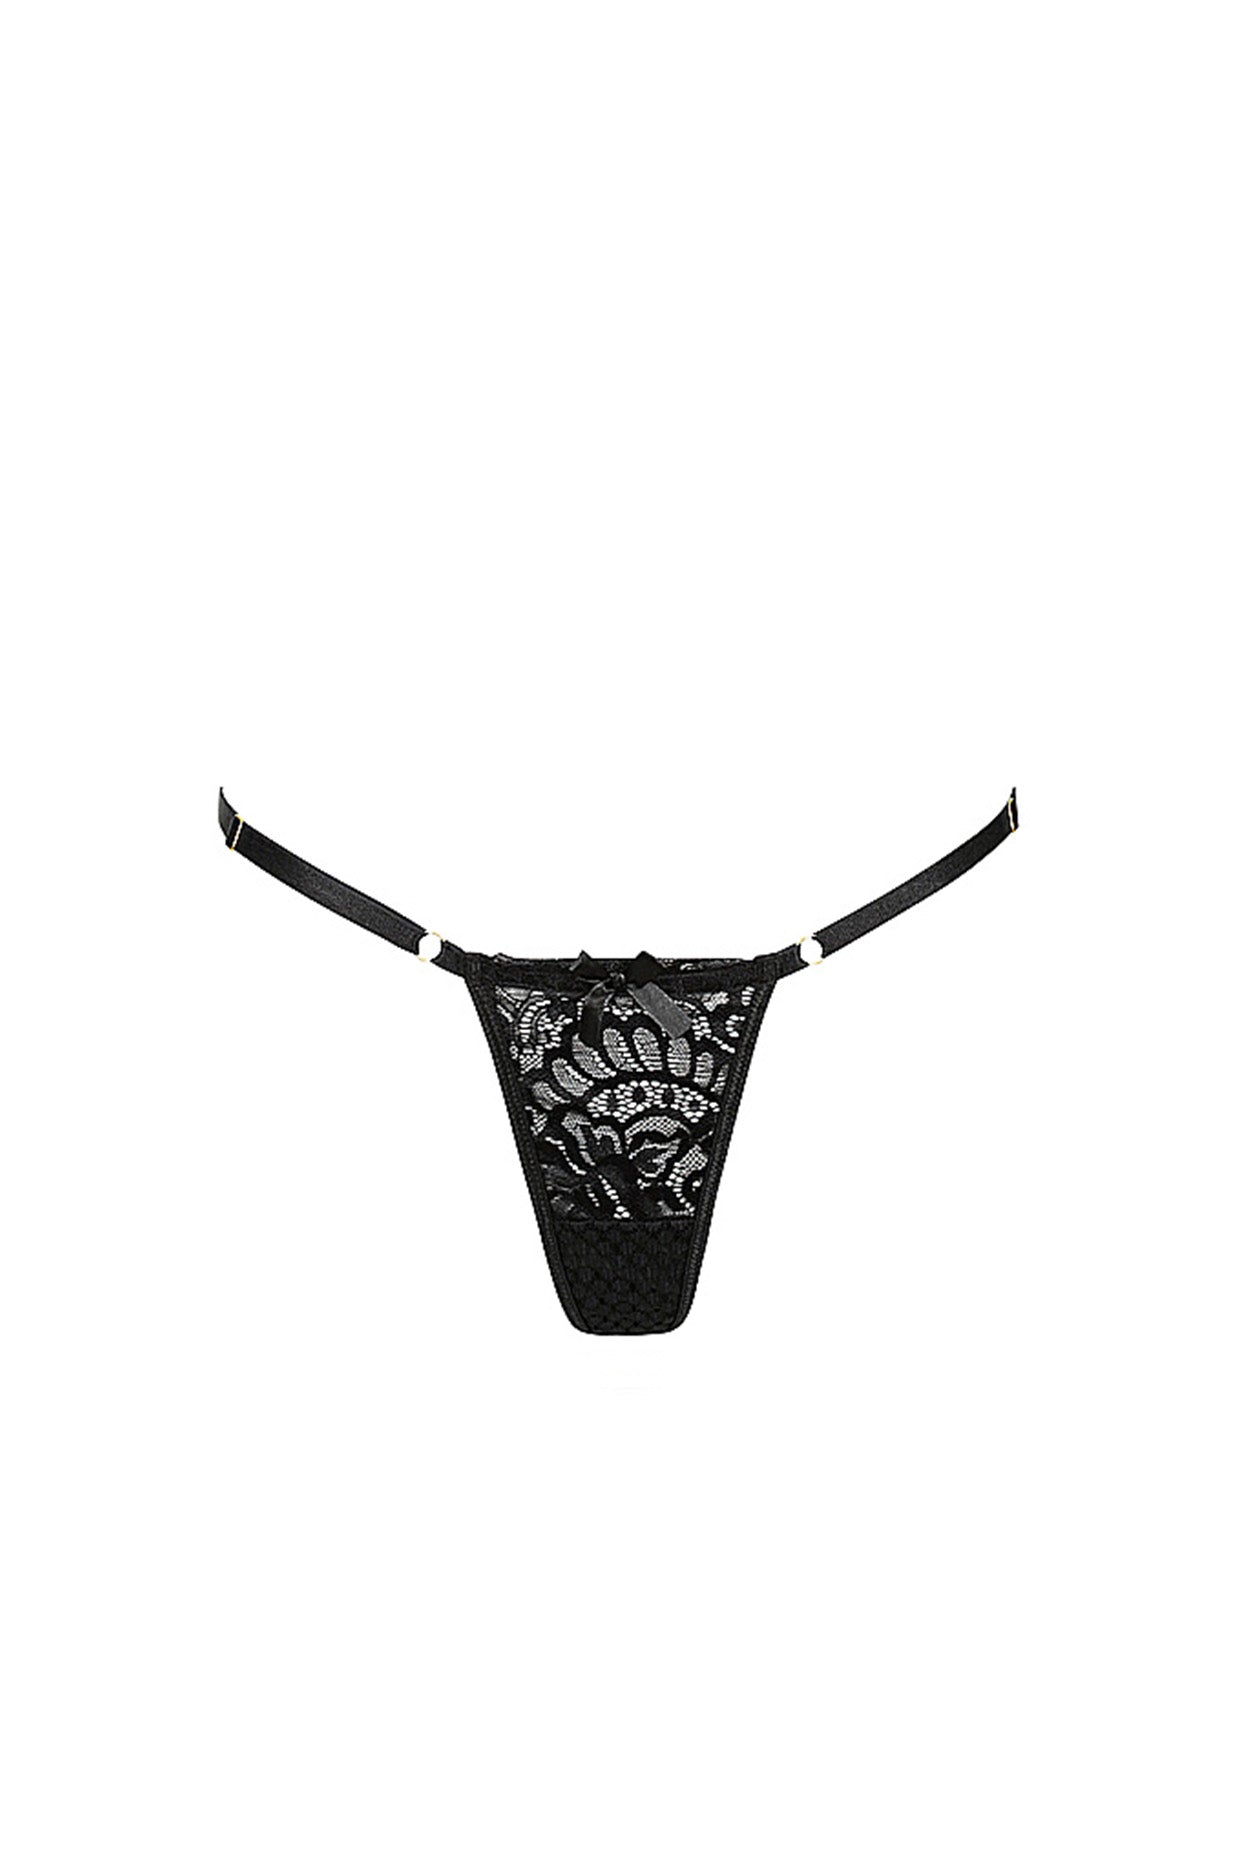 Amber Micro Thong Large with tags - SAMPLE SALE